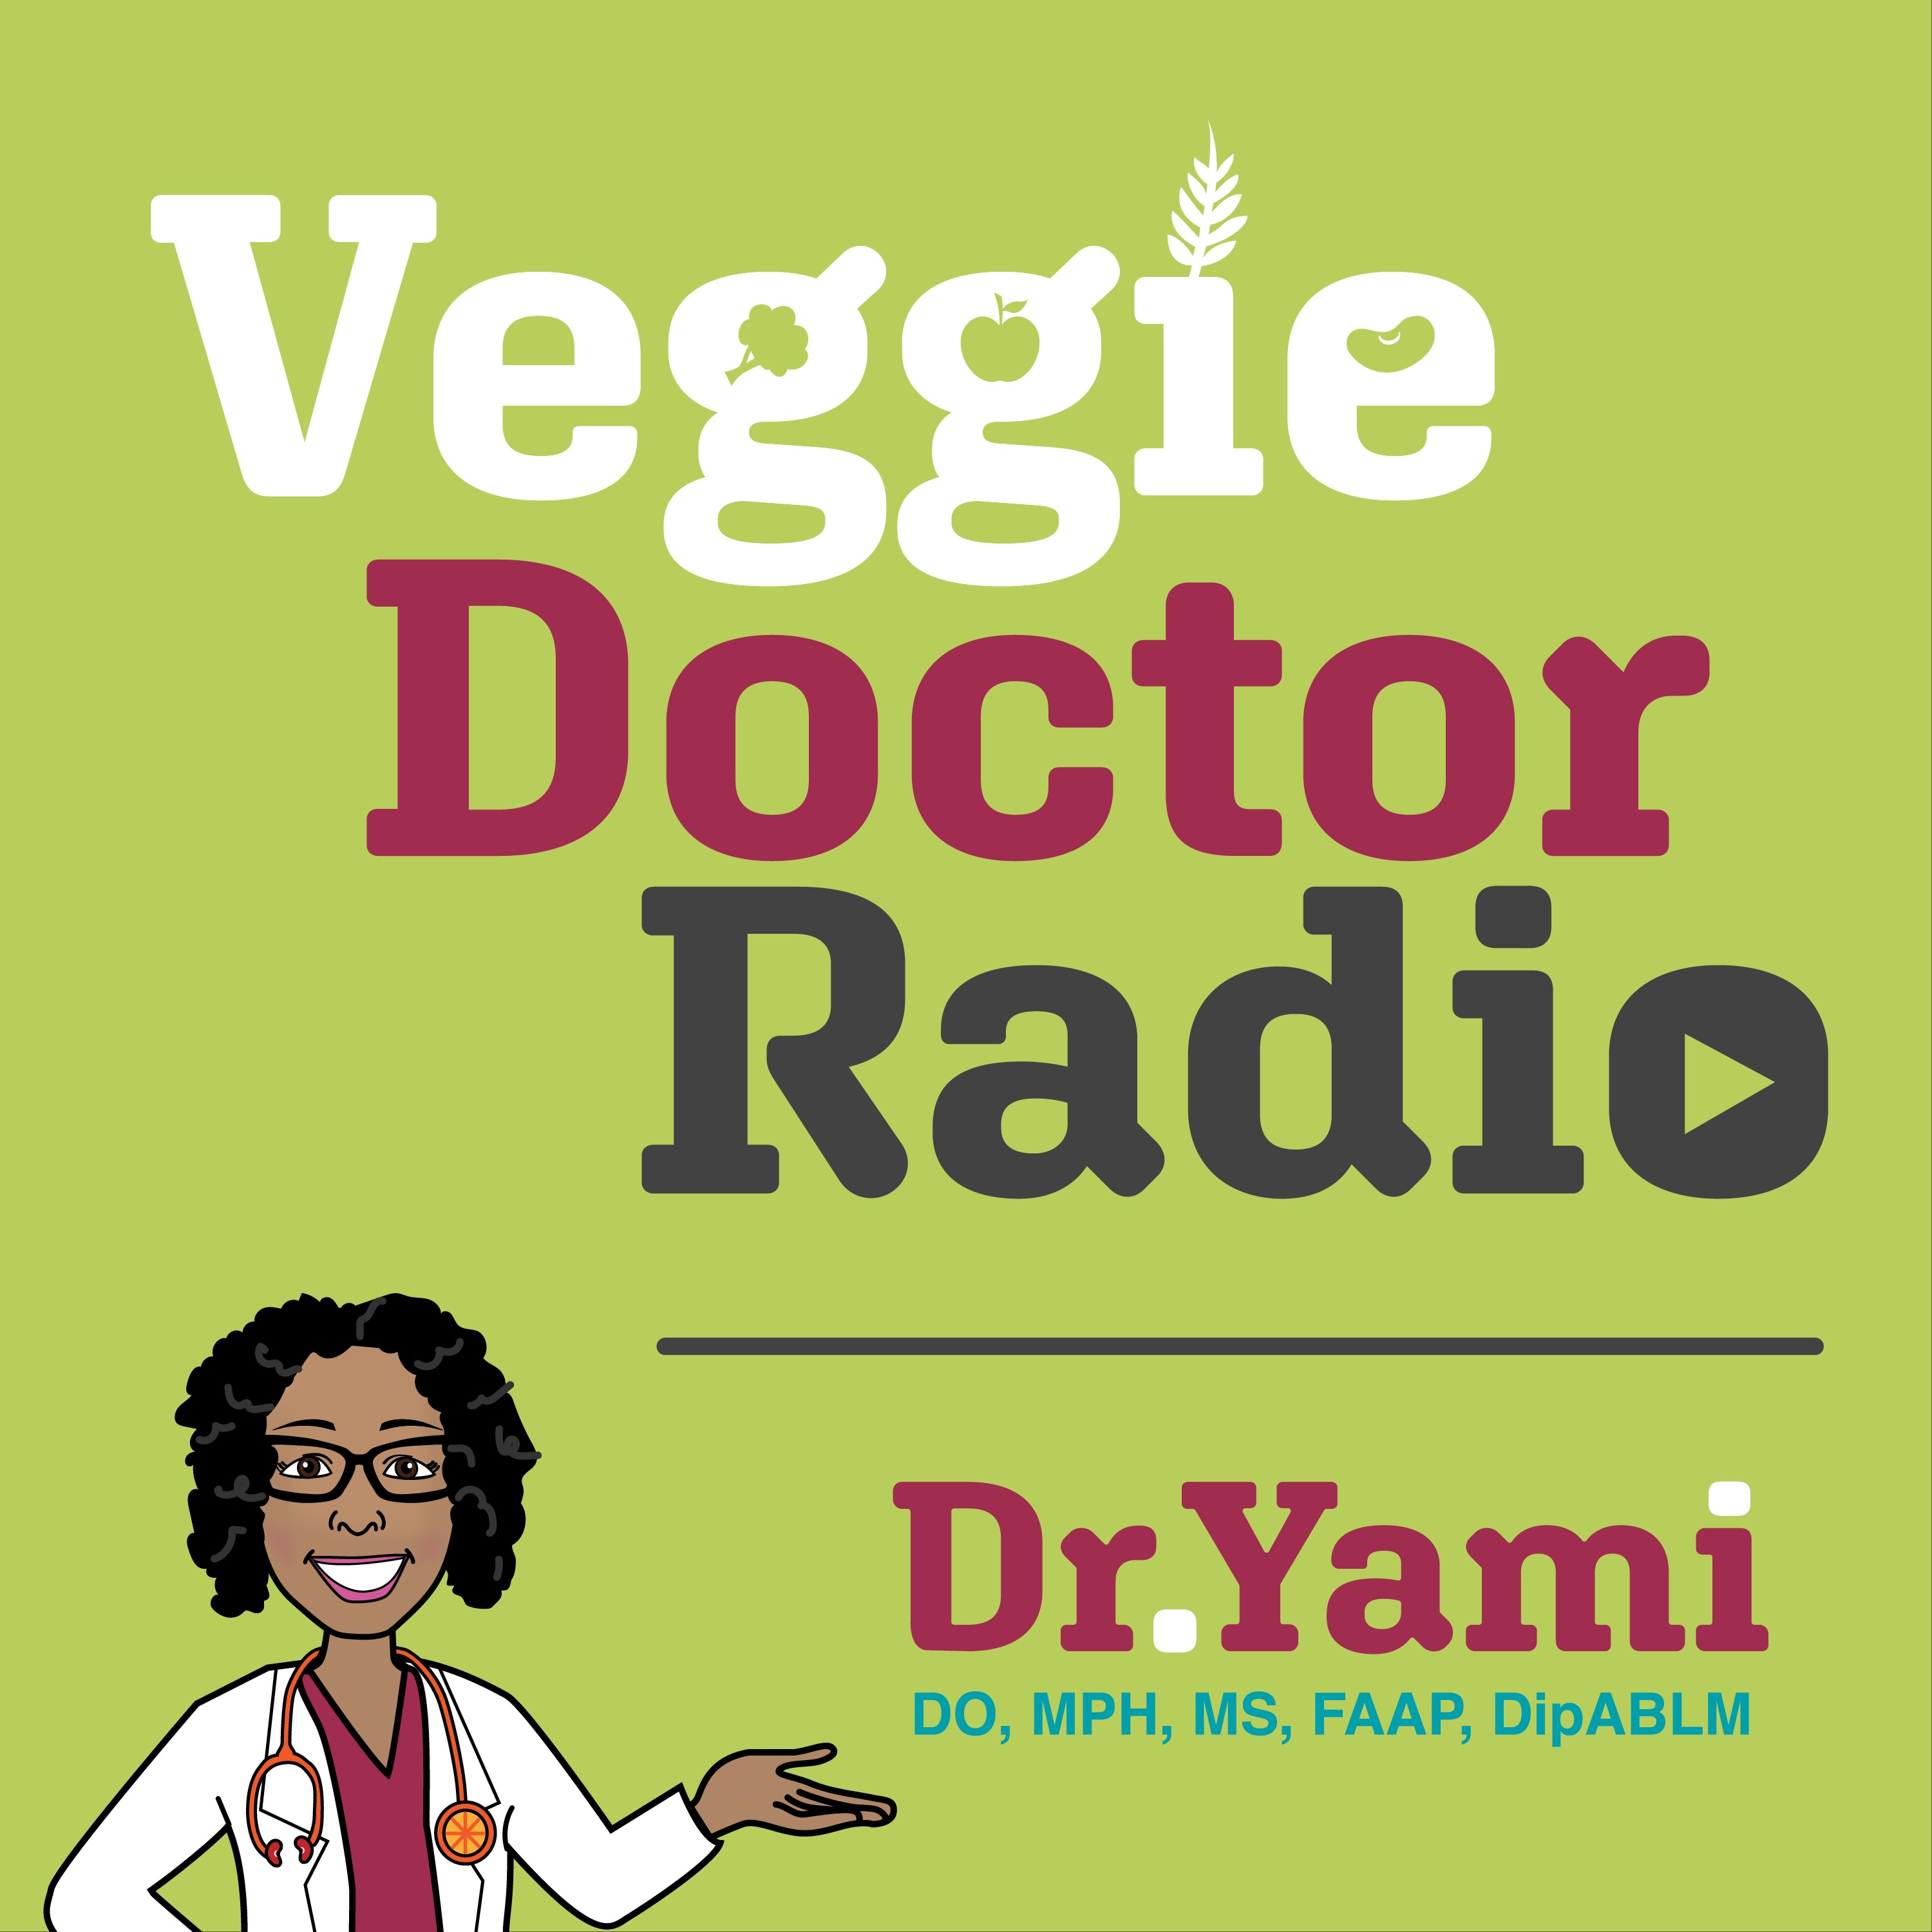 214: Body Weight Is Not a Choice: The Genetics of Body Size with Dr. Giles Yeo (Veggie Doctor Radio)